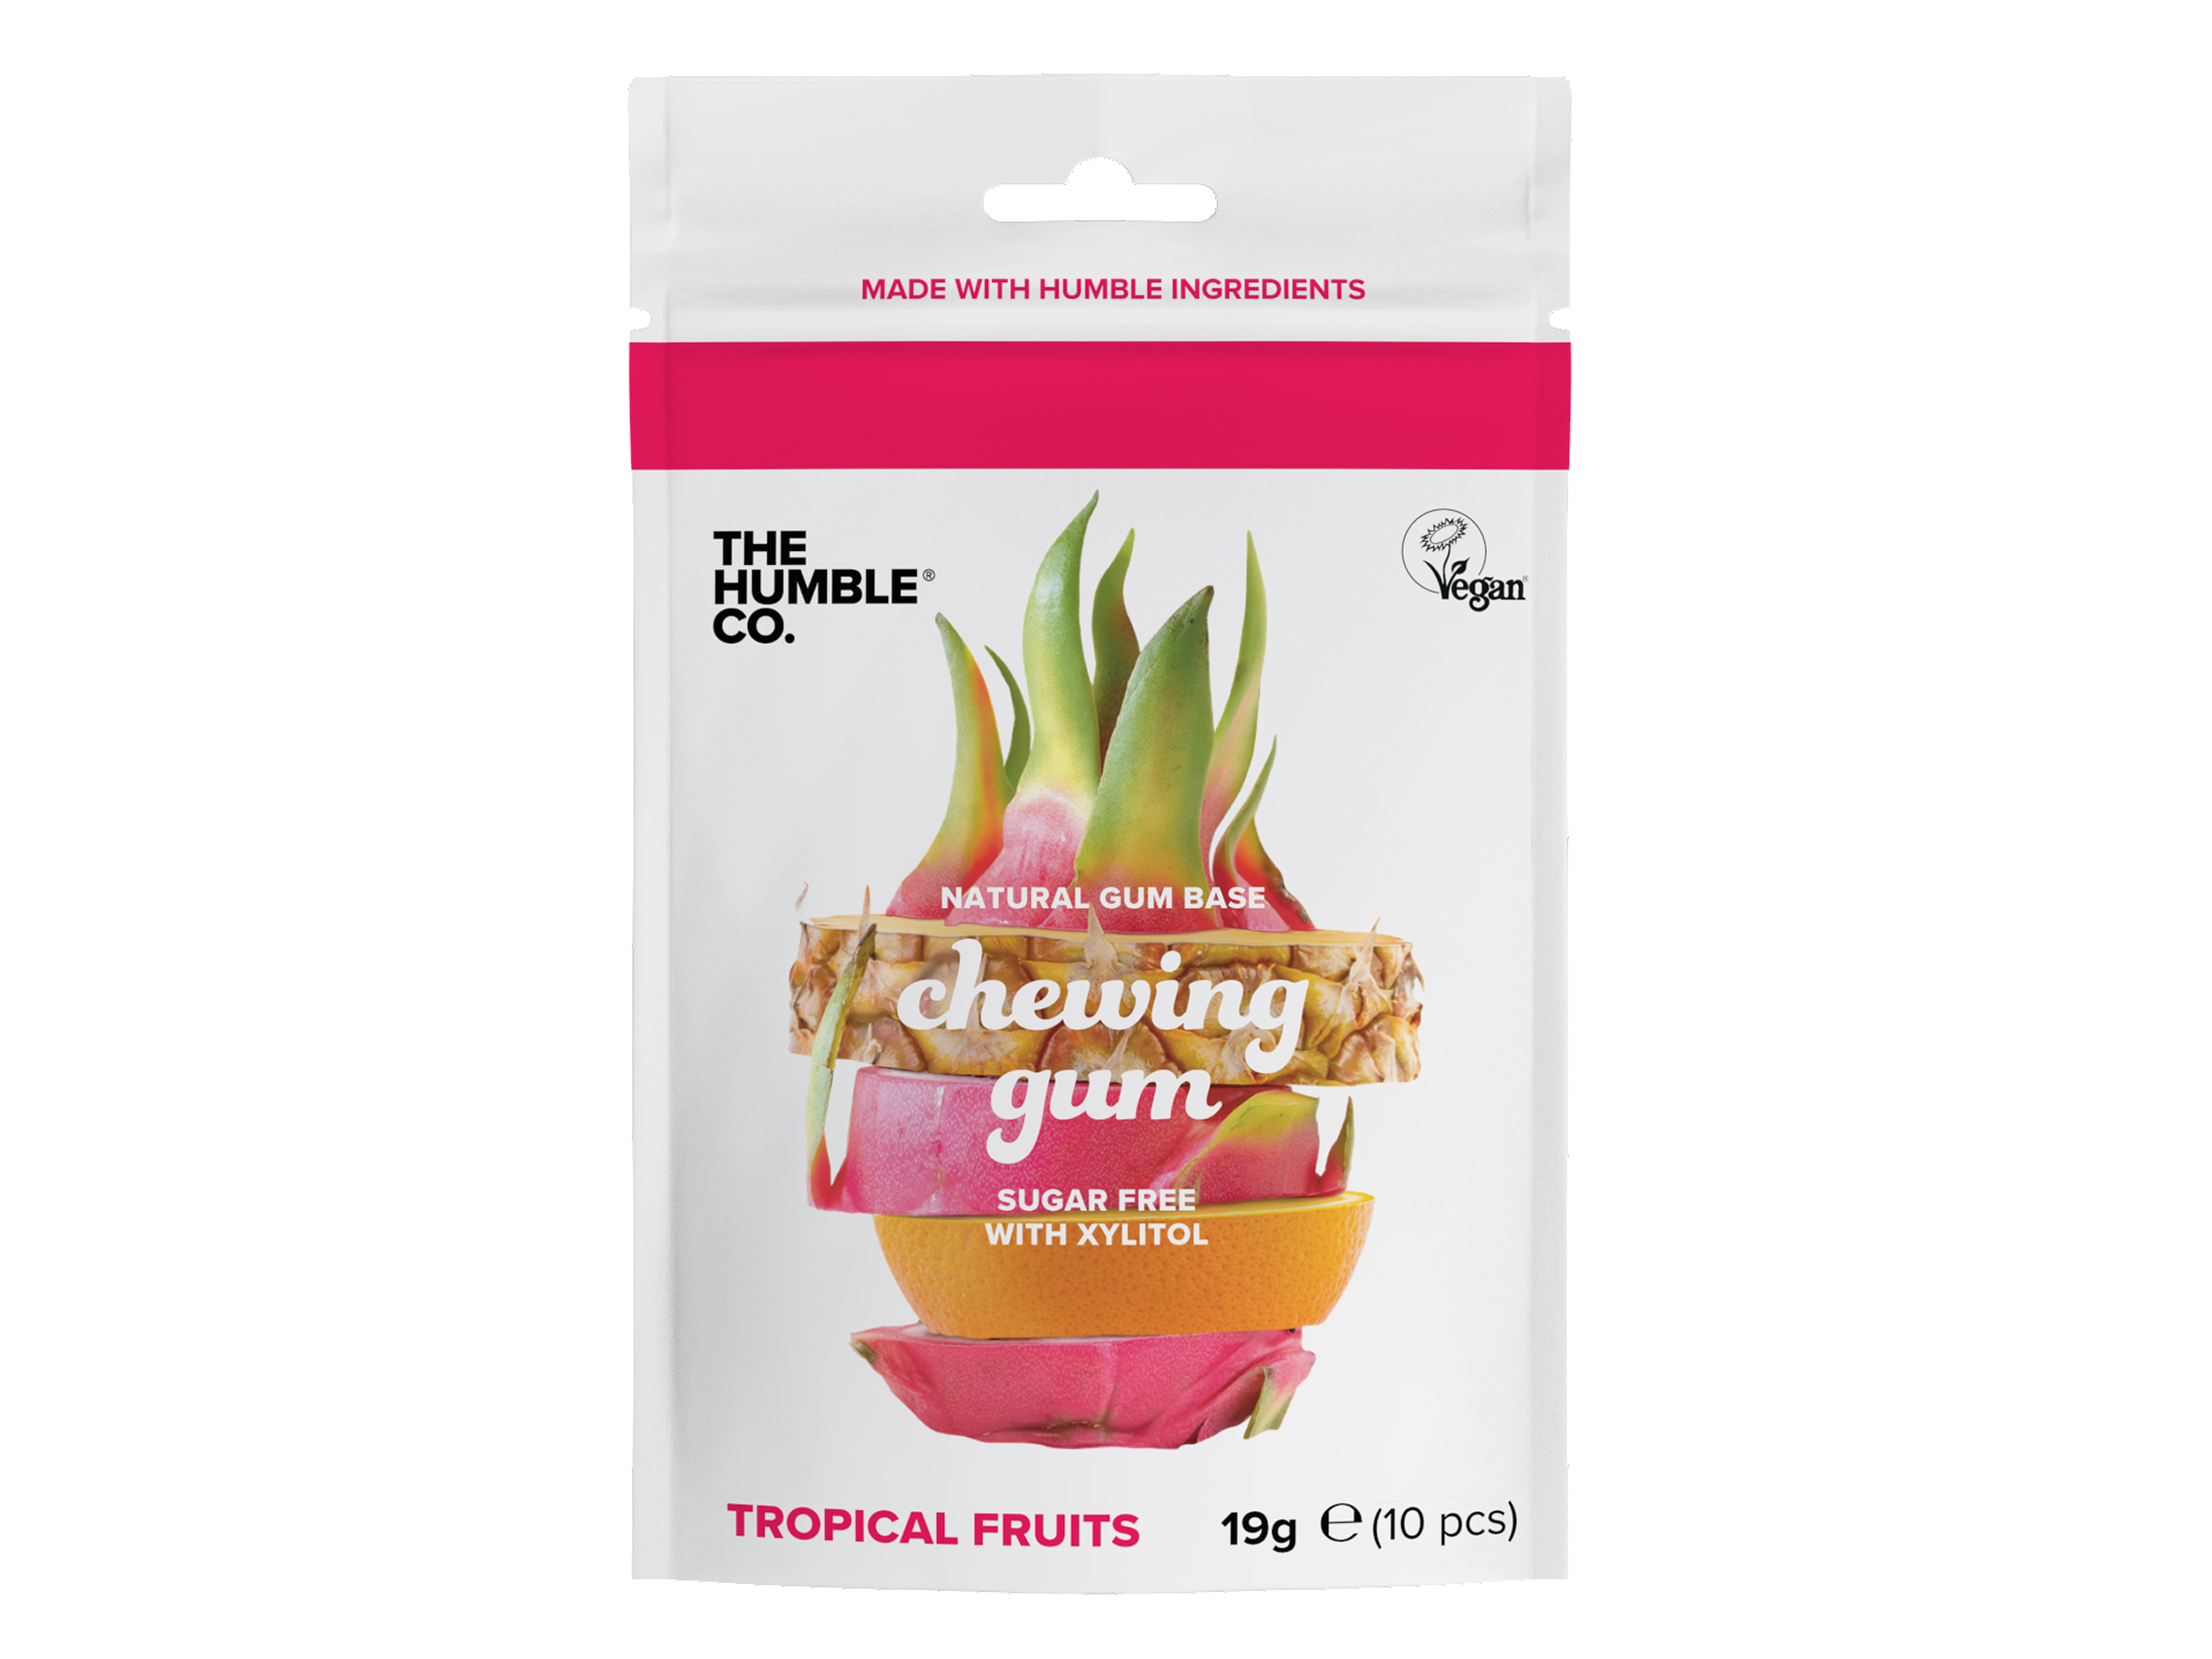 The Humble Co. Humble Natural Chewing Gum Tropisk Frukt, 10 stk